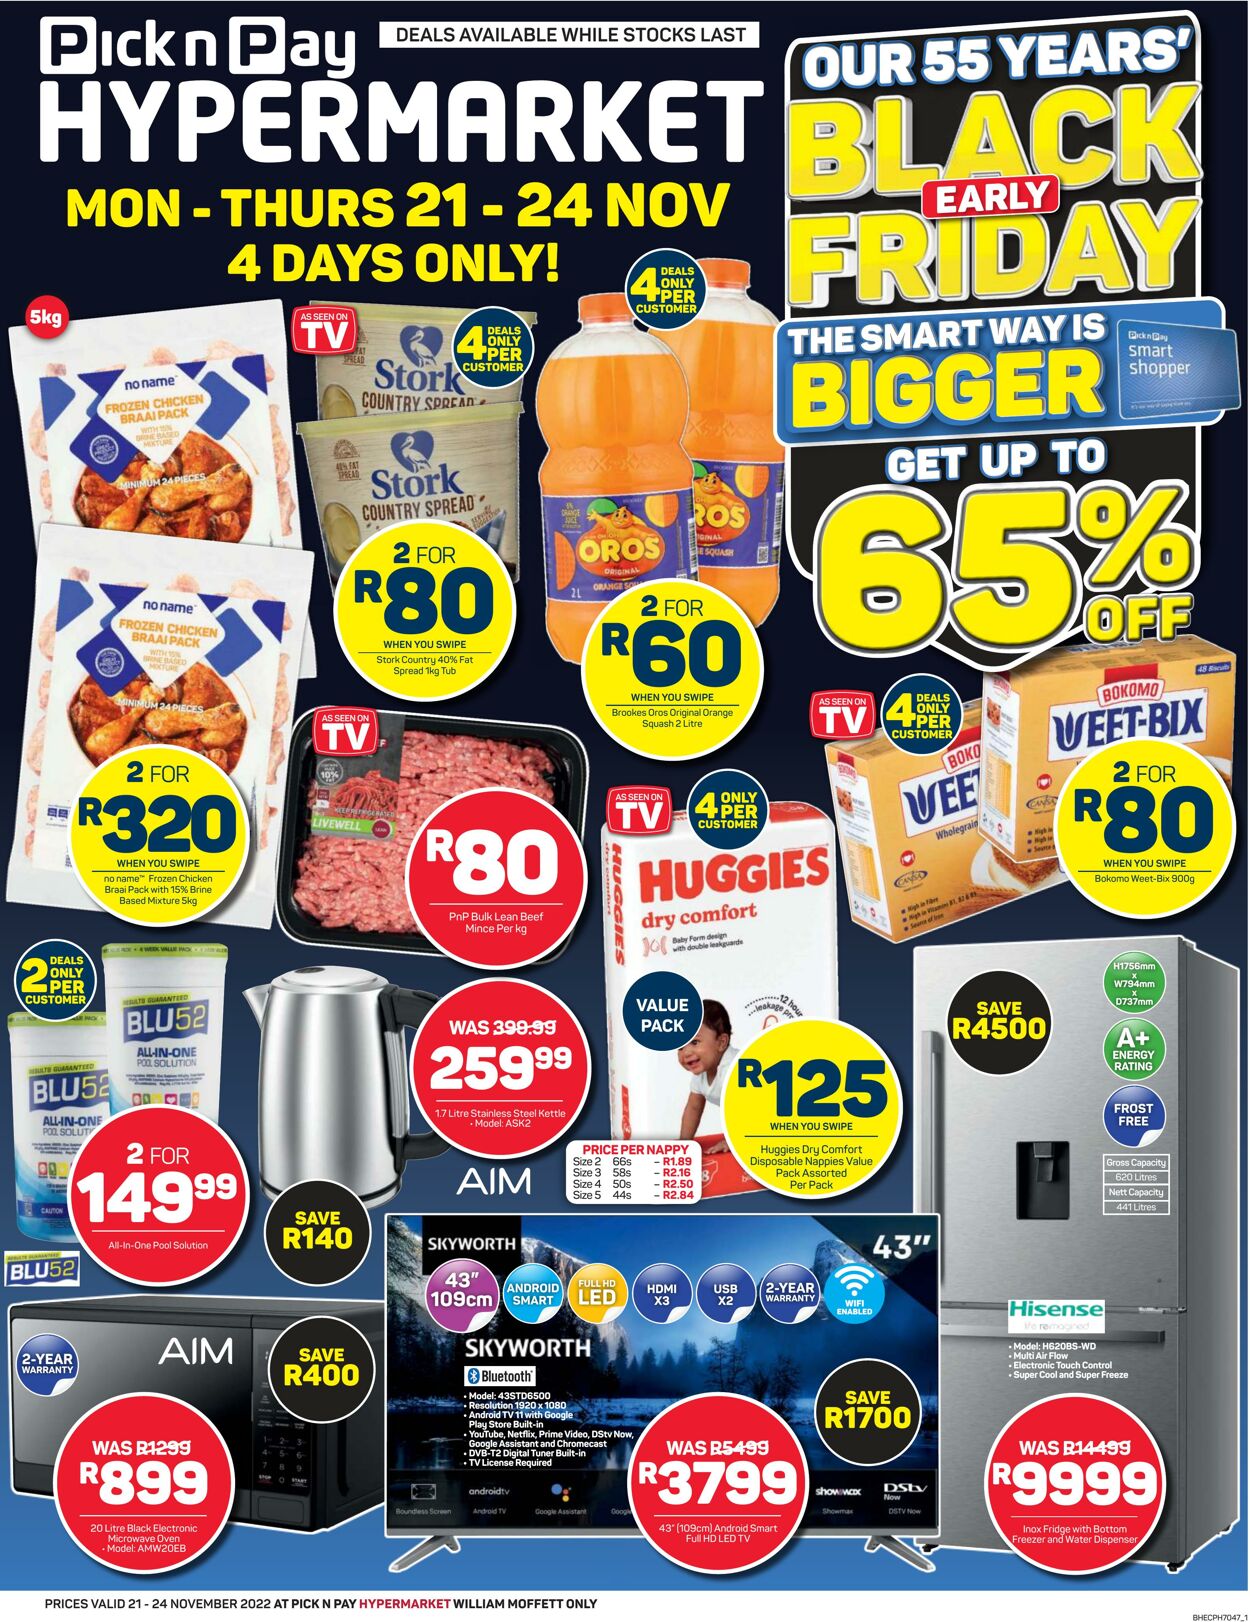 Current special Pick n Pay EASTERN CAPE Black Friday 2022 Valid